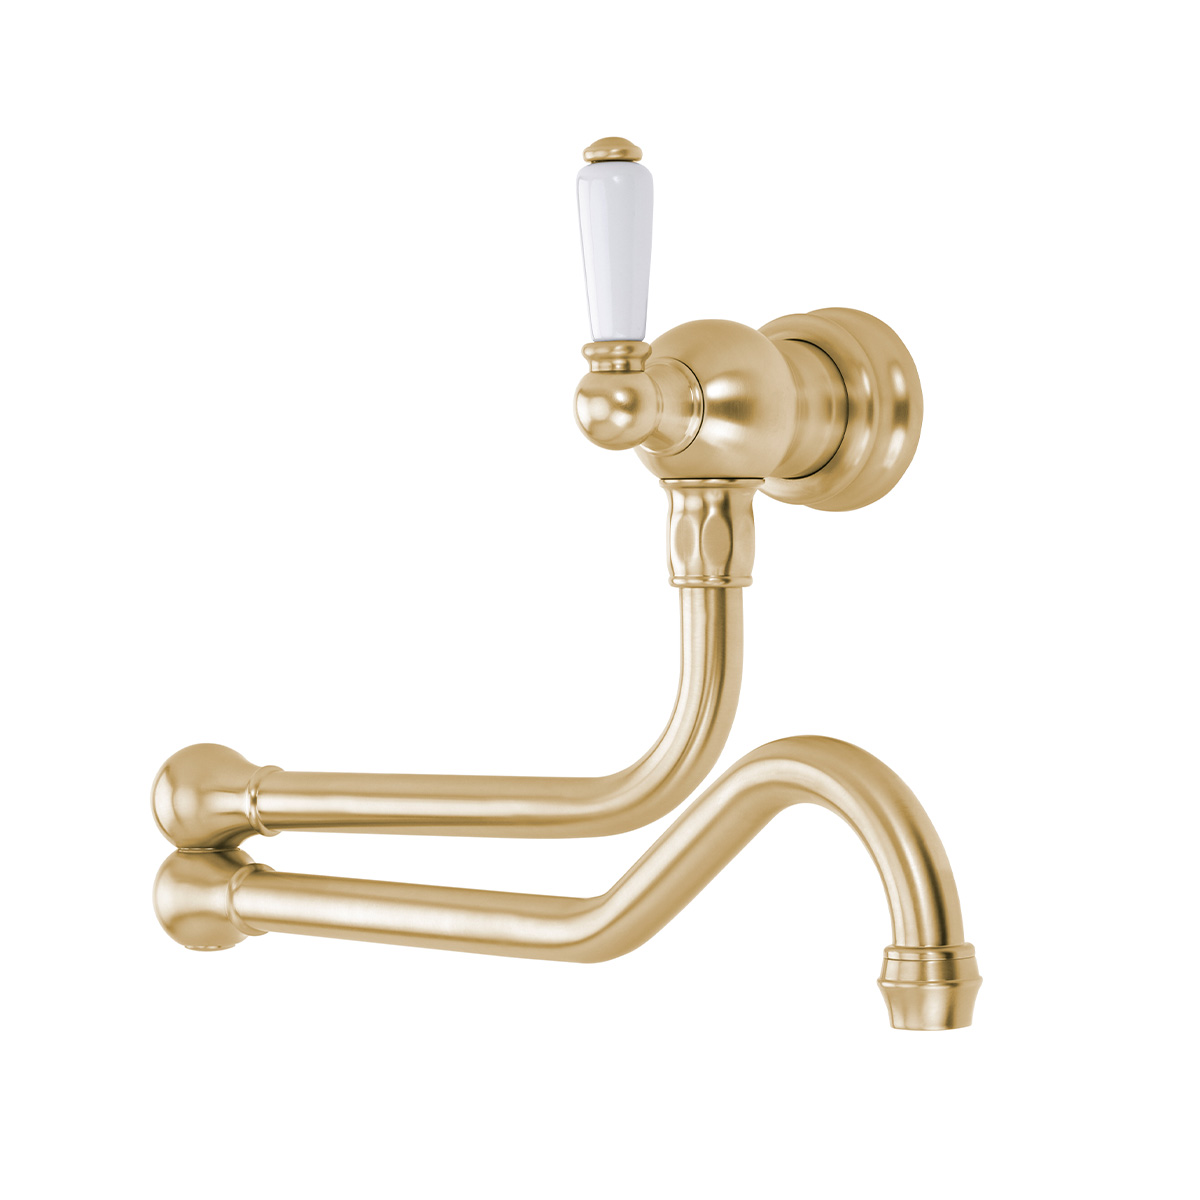 Shaws by Perrin & Rowe wall mounted pot filler in Satin Brass. Traditional style pot filler with single white porcelain handle - AUSH.4417. Distributed in Australia by Luxe by Design, Brisbane.